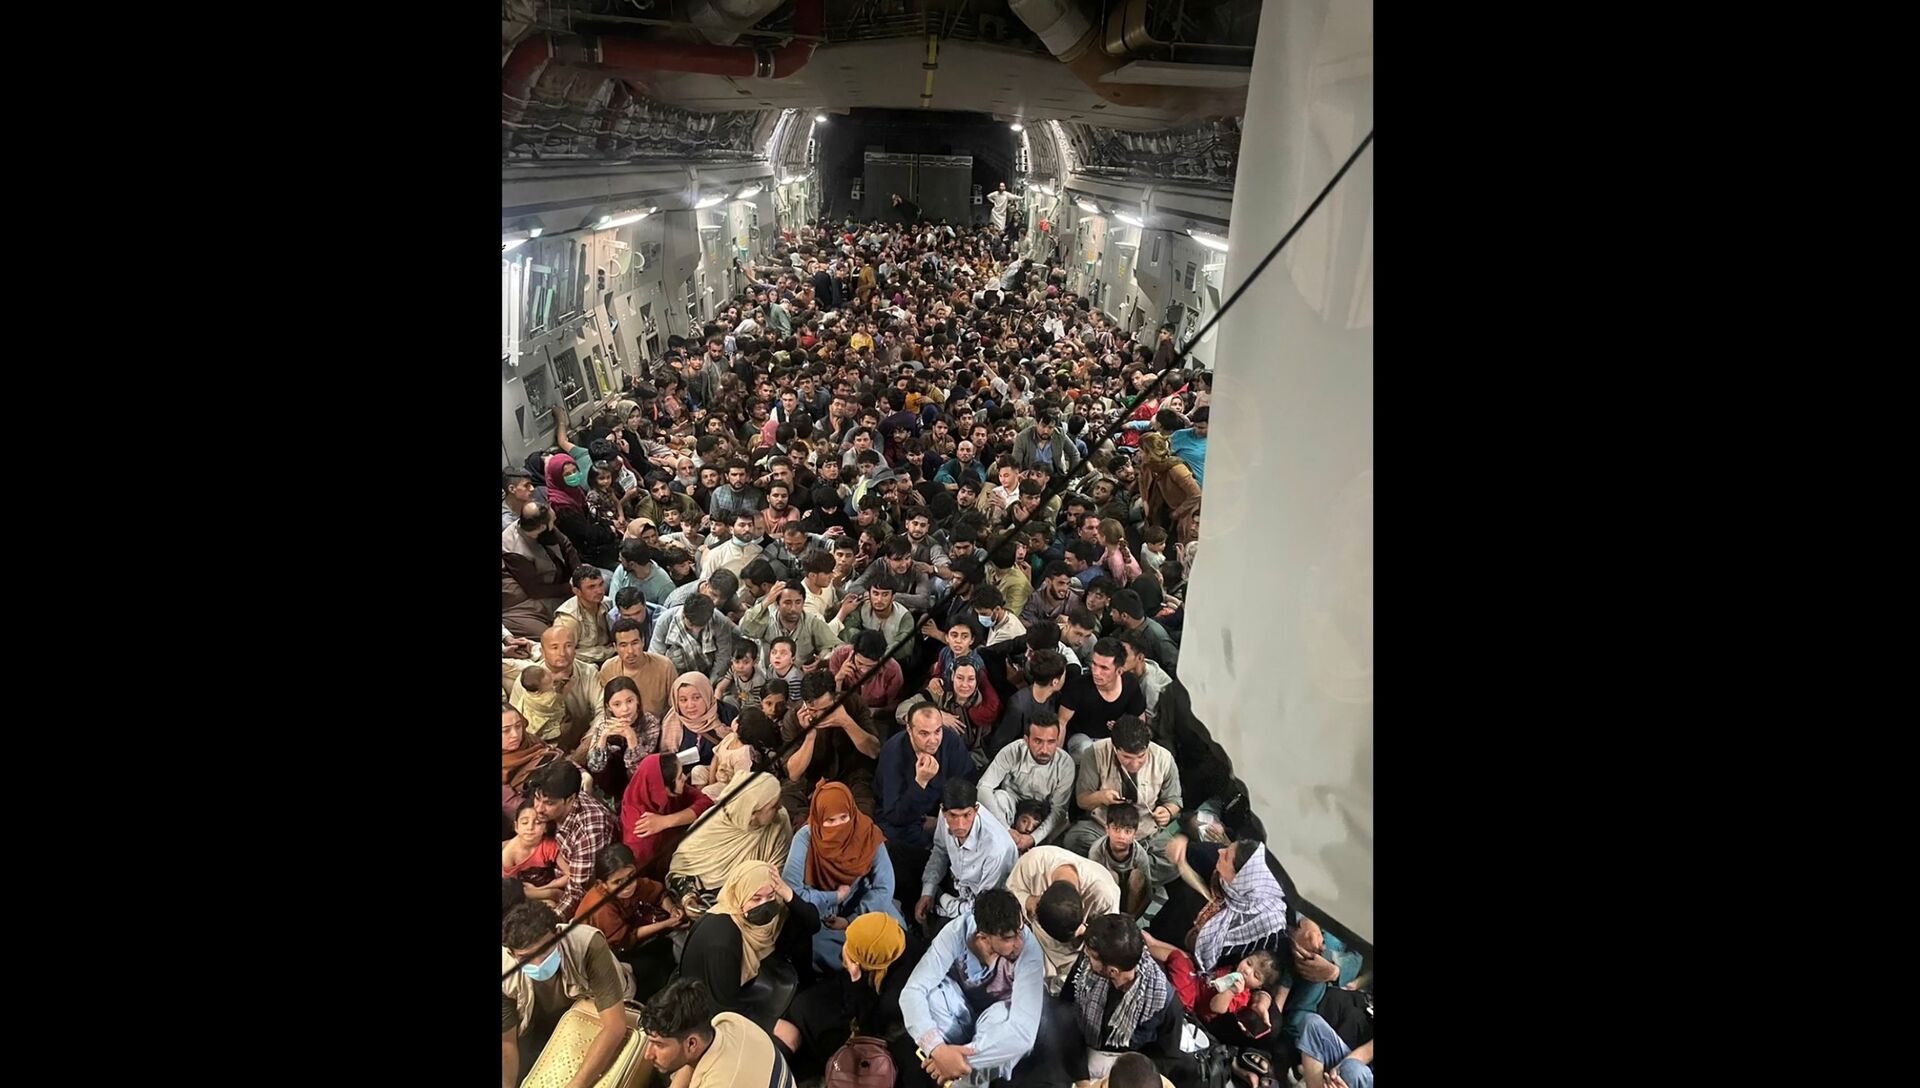 Evacuees crowd the interior of a U.S. Air Force C-17 Globemaster III transport aircraft, carrying some 640 Afghans to Qatar from Kabul, Afghanistan August 15, 2021. Picture taken August 15, 2021 - Sputnik International, 1920, 07.09.2021